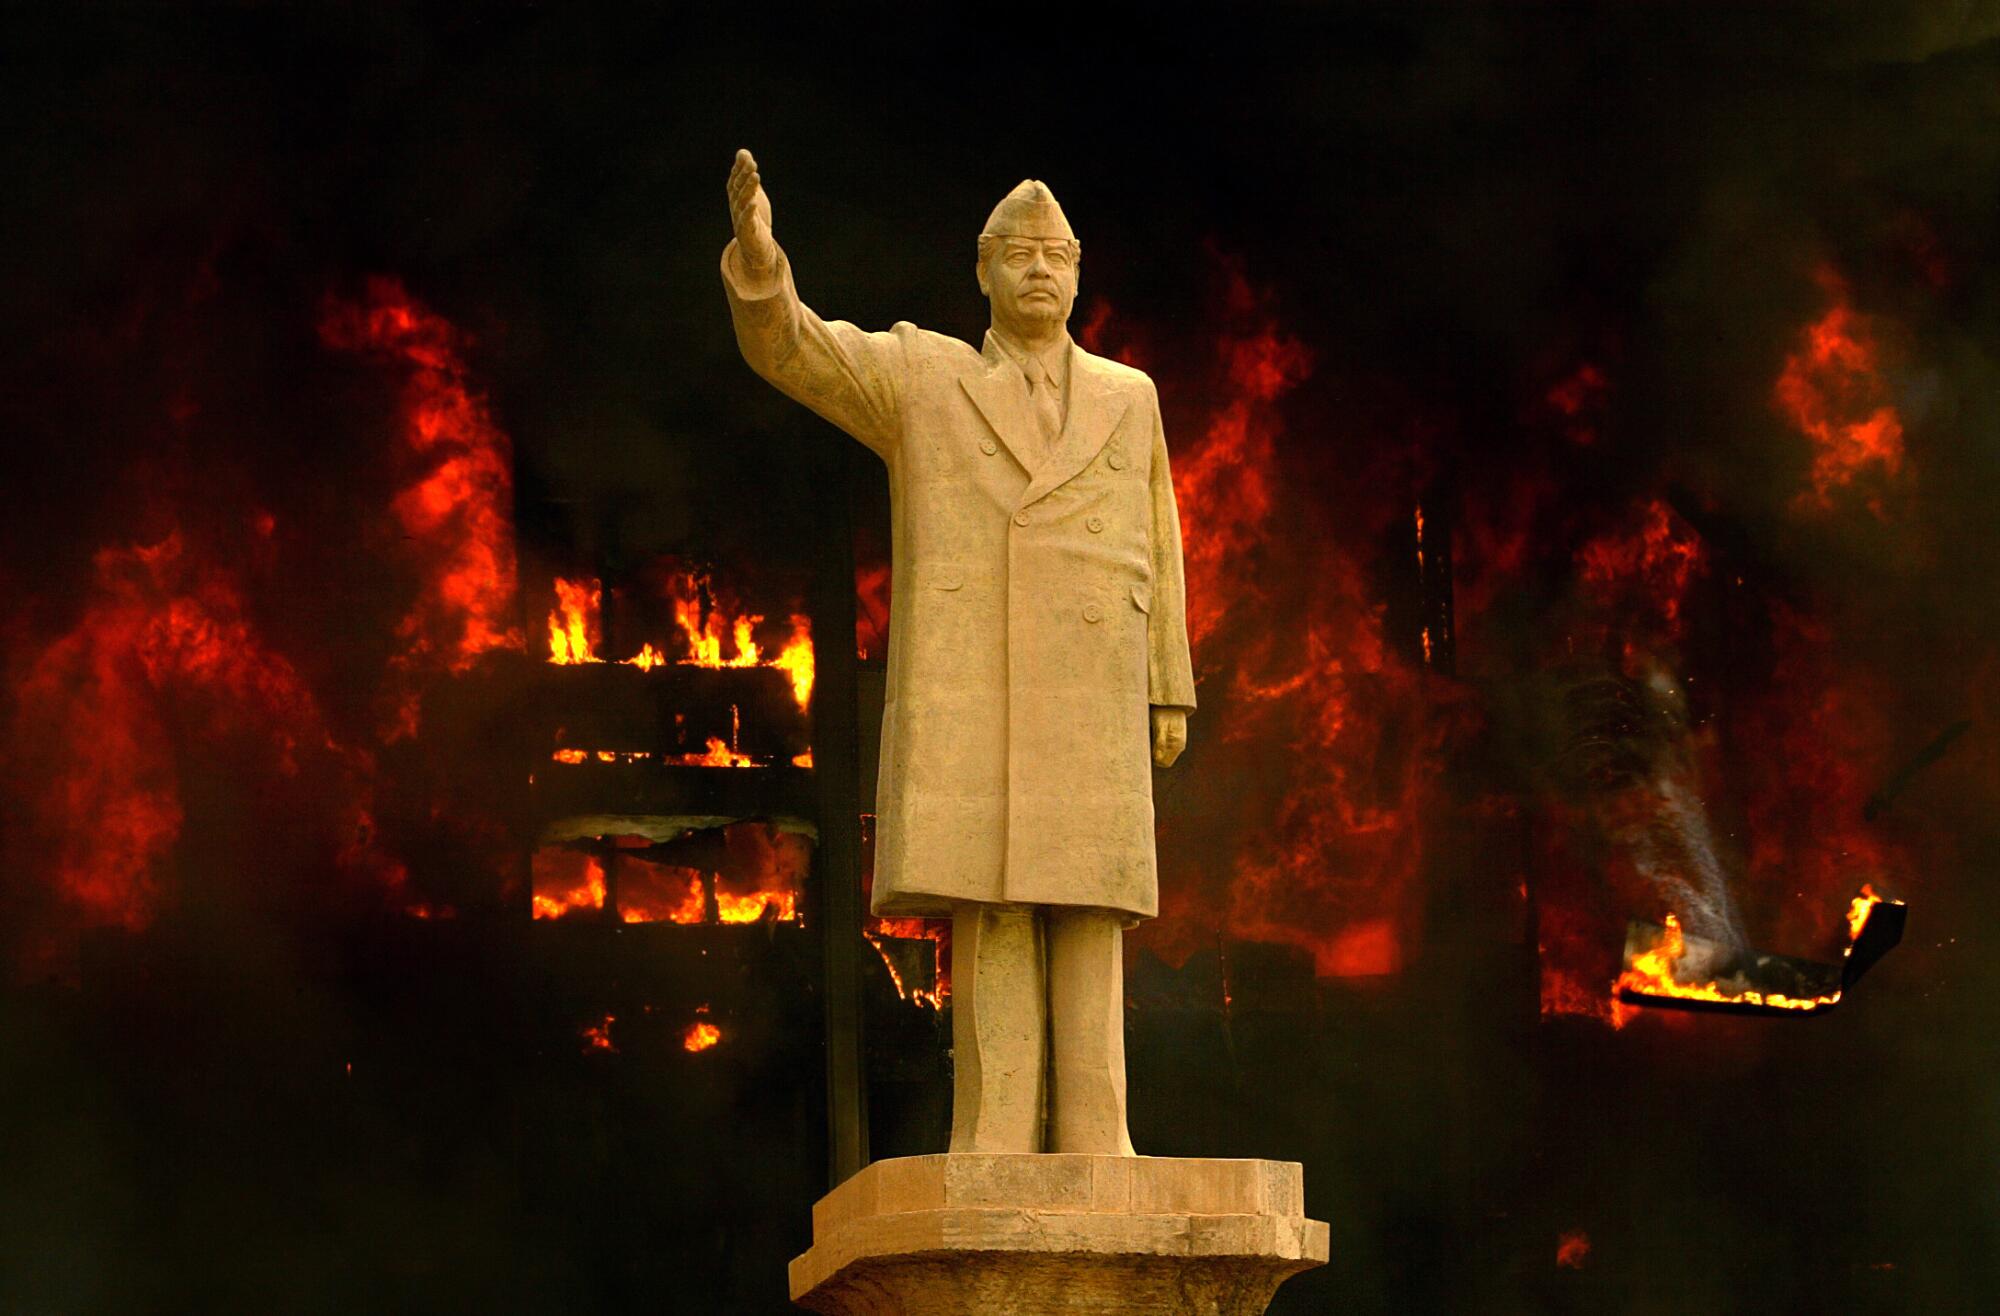 A statue of Saddam Hussein with his arm raised in front of a burning building